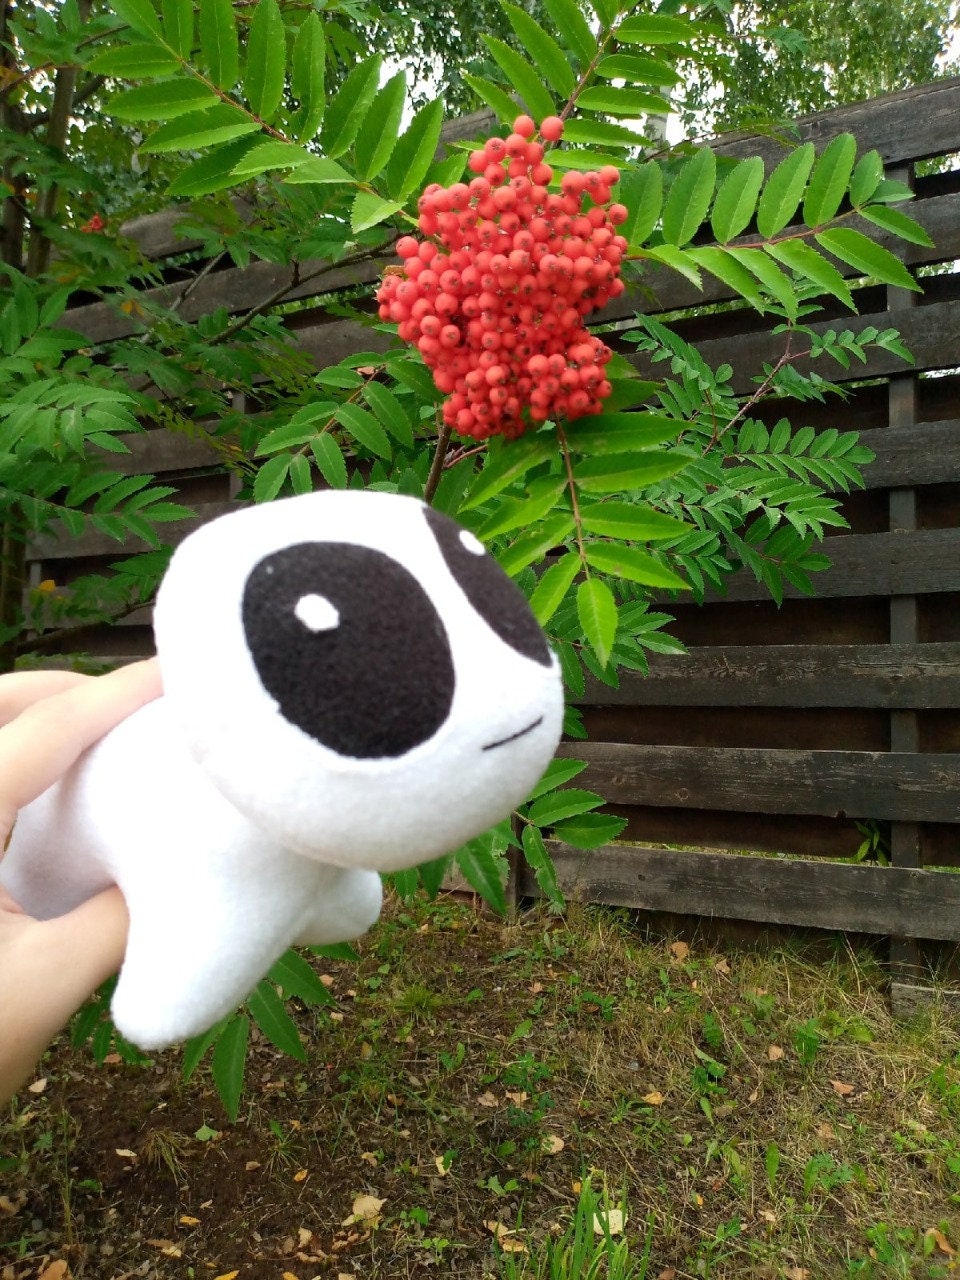 Jumbo TBH White YIPPEE Creature Plush [12 Inch] - DayLikesCookies's Ko-fi  Shop - Ko-fi ❤️ Where creators get support from fans through donations,  memberships, shop sales and more! The original 'Buy Me